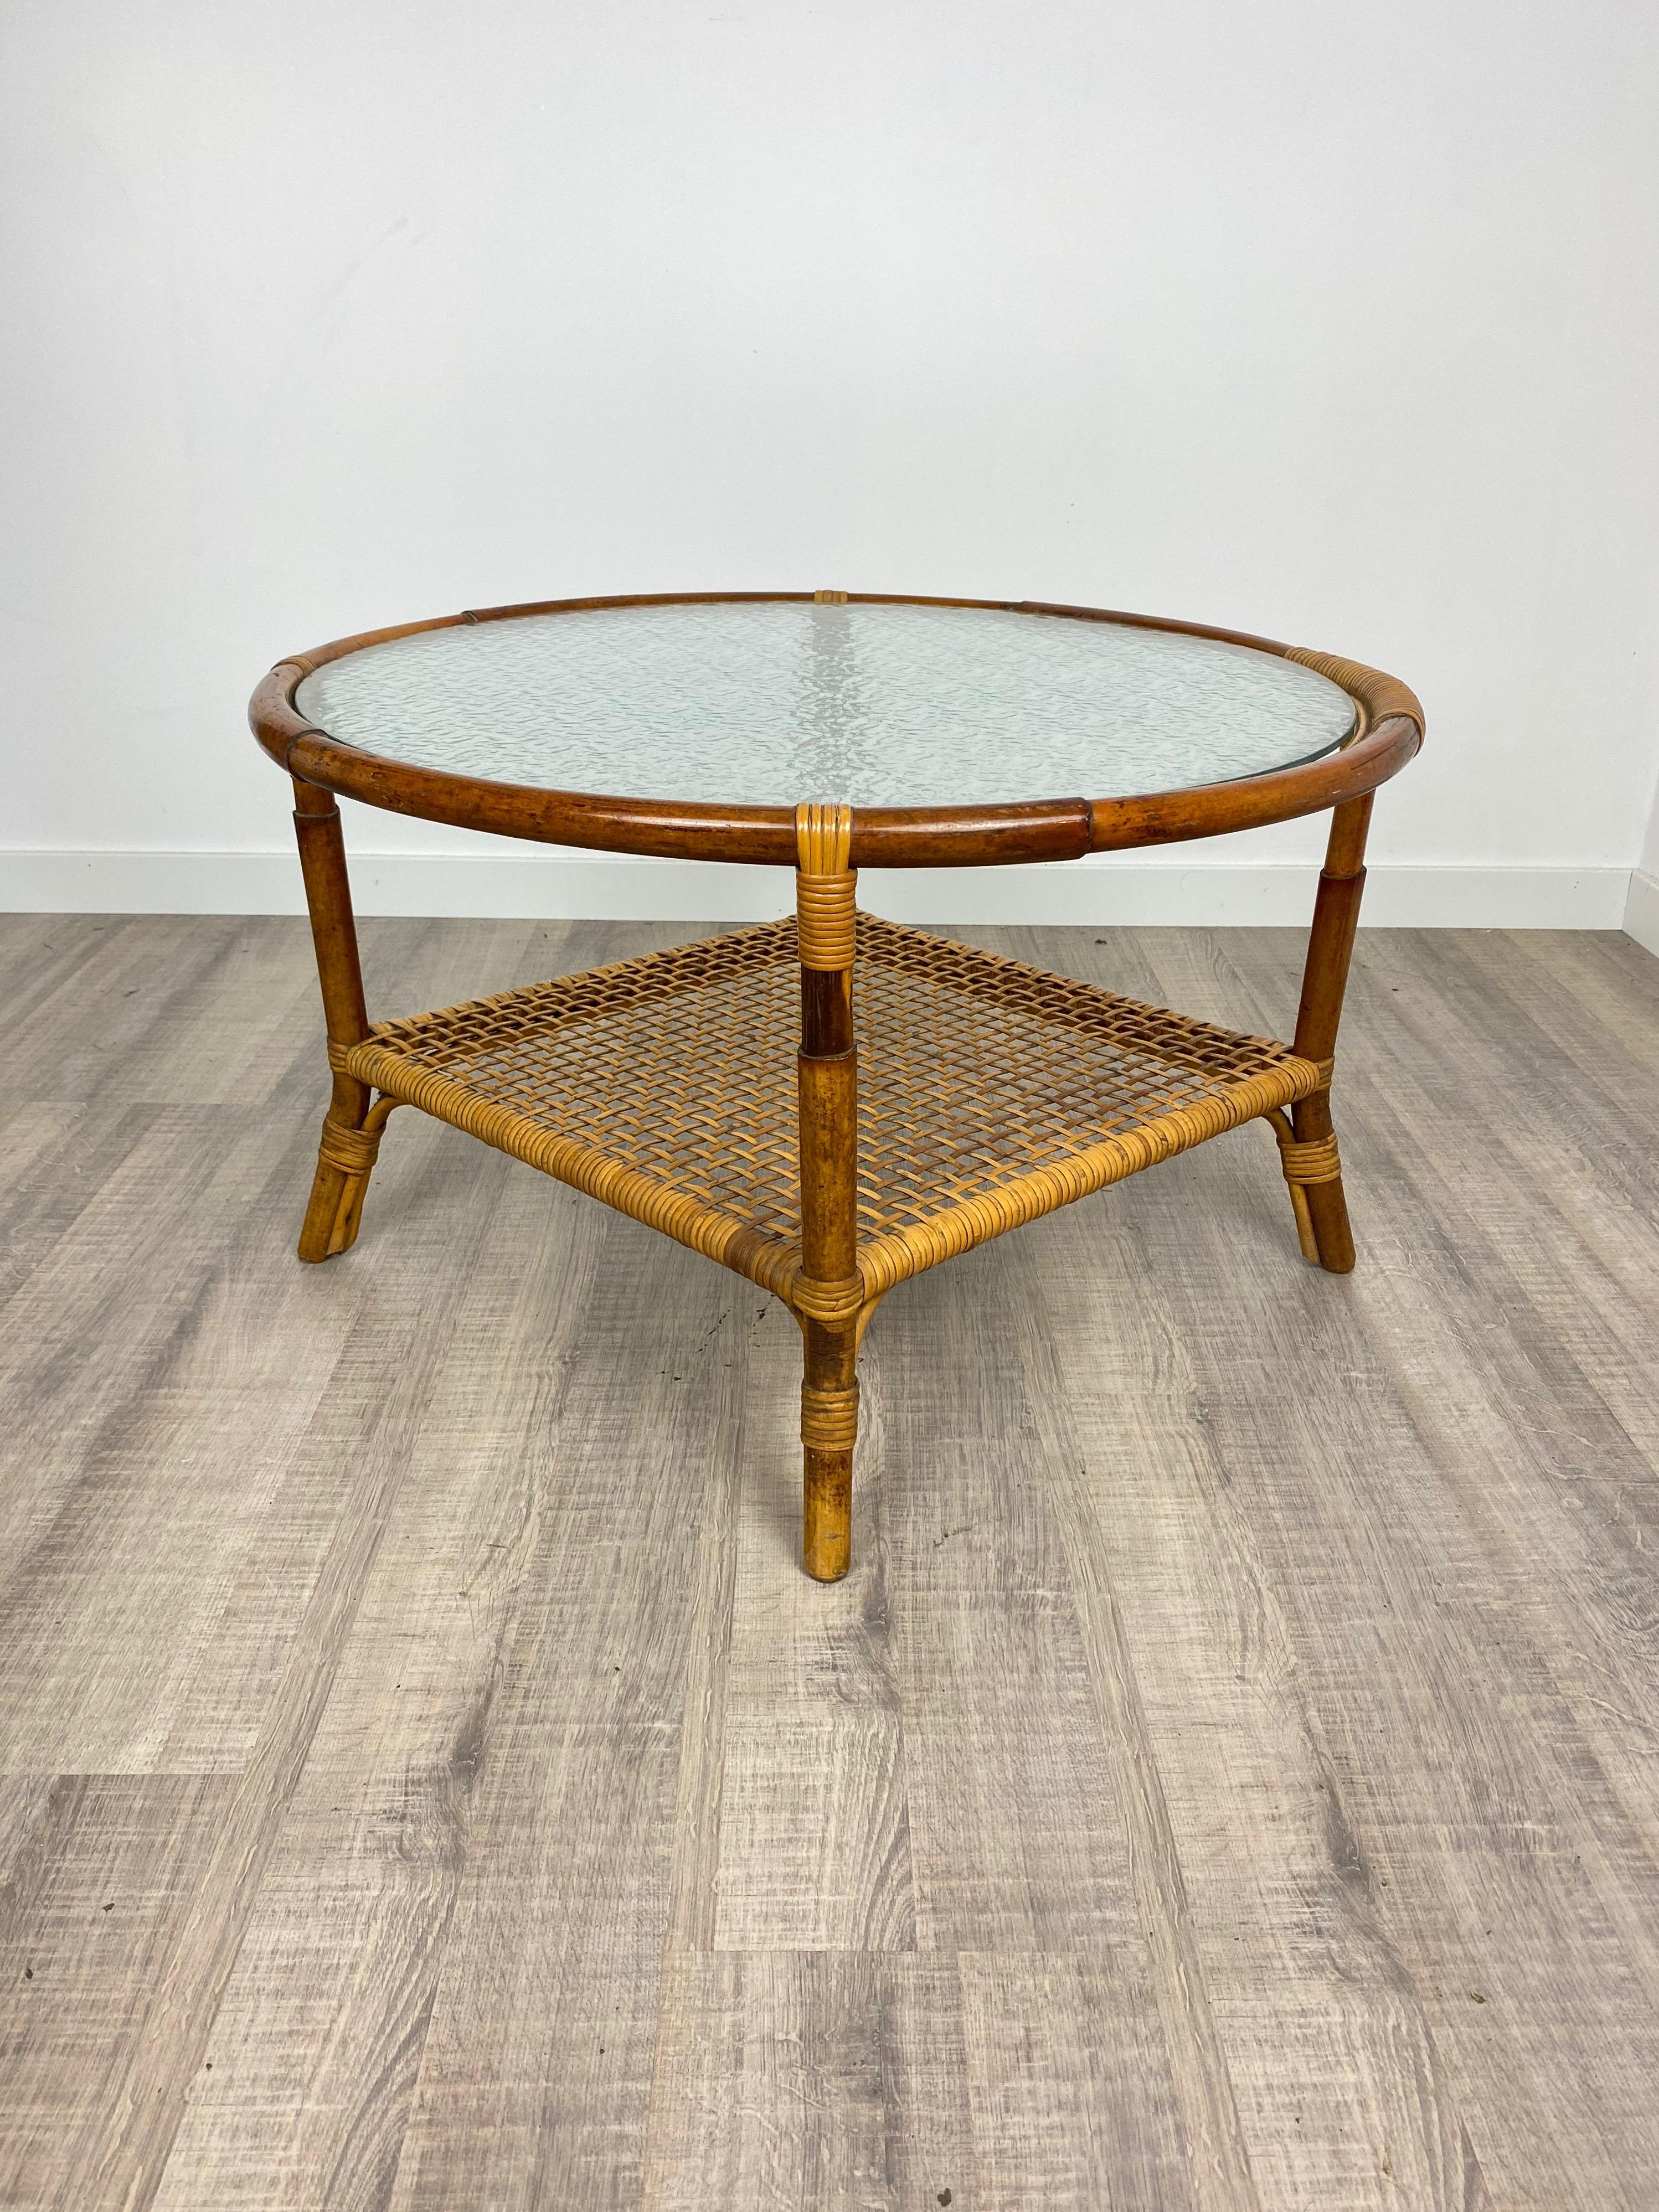 Mid-Century Modern Coffee Table in Bamboo Rattan and Frosted Glass, Italy, 1960s For Sale